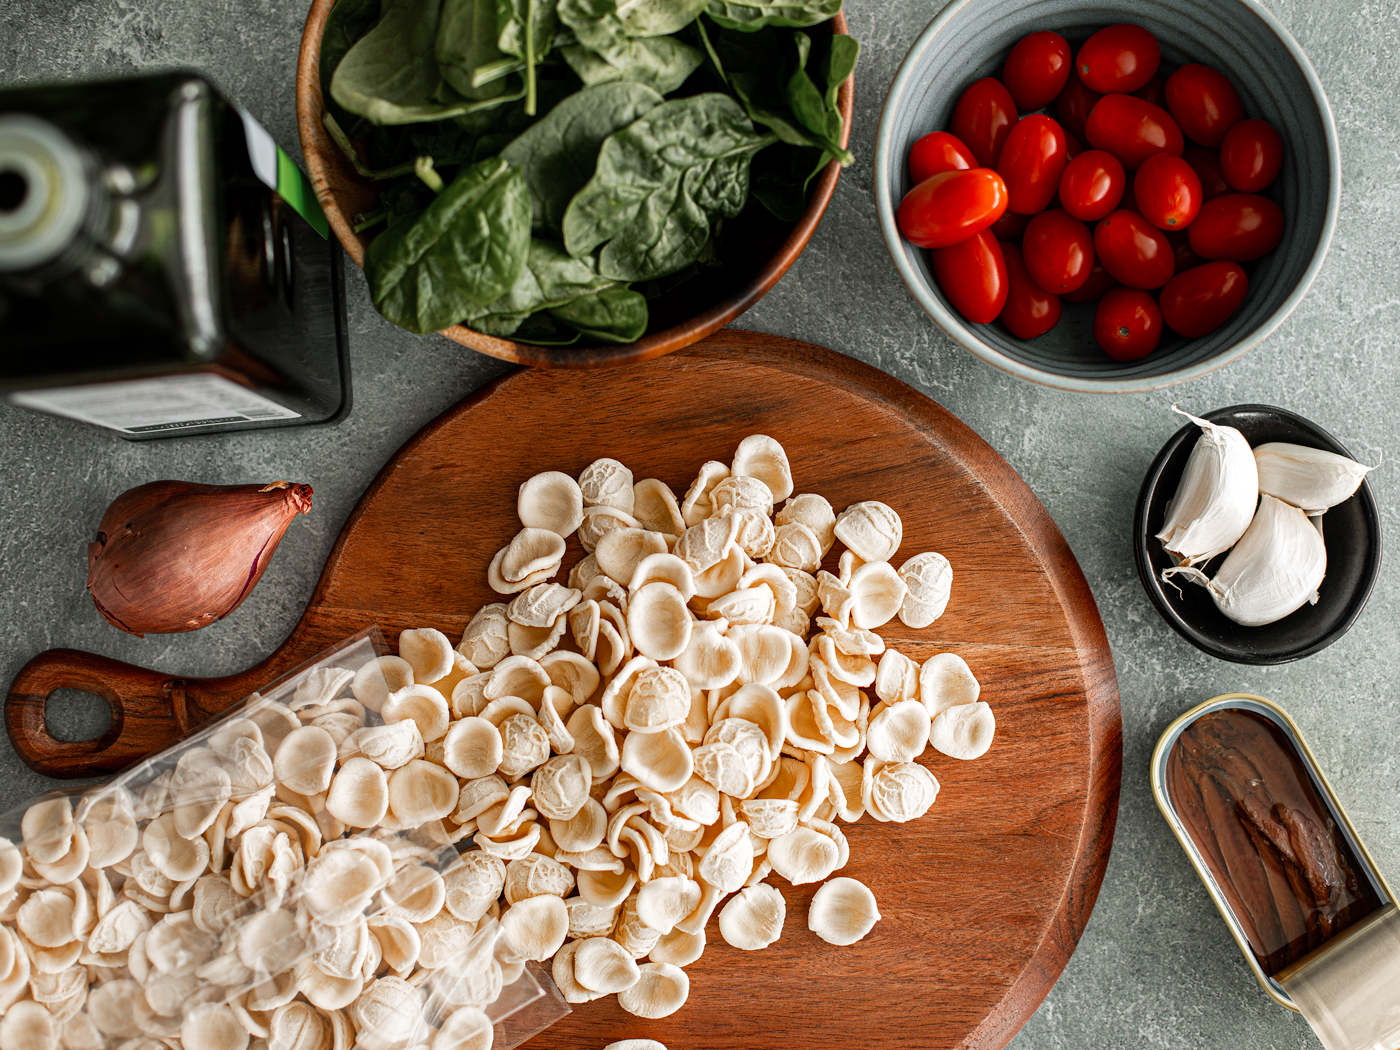 Uncooked orecchiette pasta on cutting board with bowls of spinach, tomatoes, garlic, and a tin of anchovies.